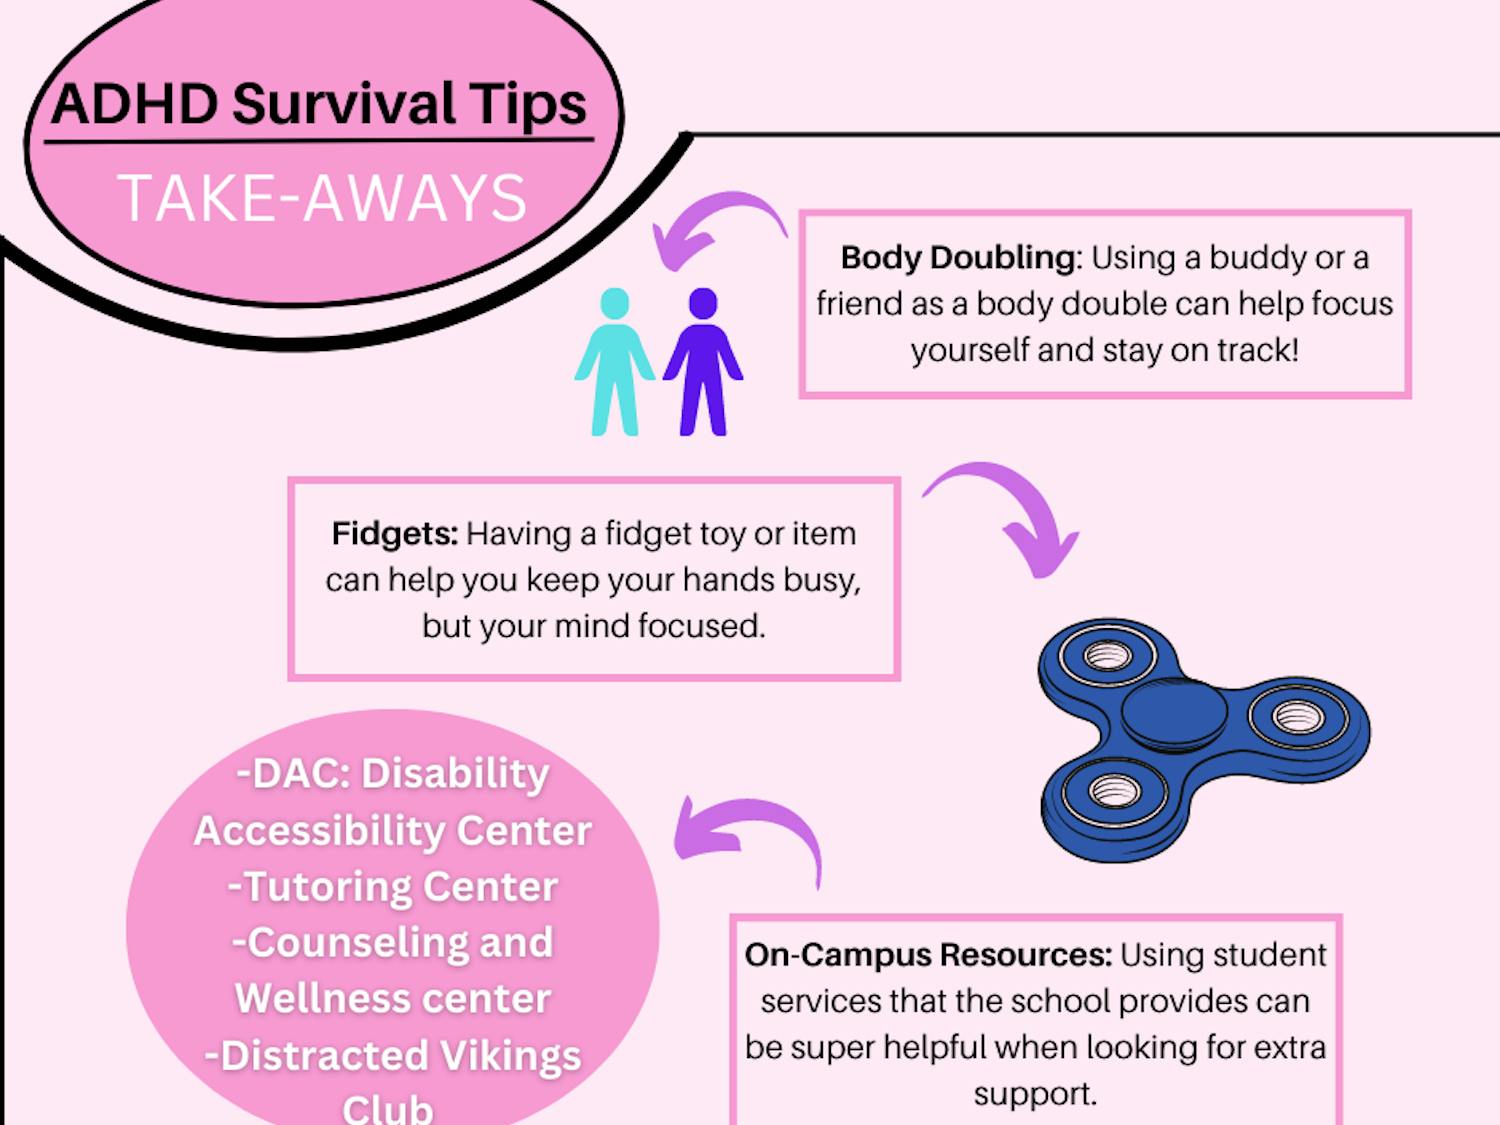 ADHD Survival Tips -DAC Disability Accessibility Center -Tutoring Center -Counseling and Wellness center -Distracted Vikings Club TAKE-AWAYS.png